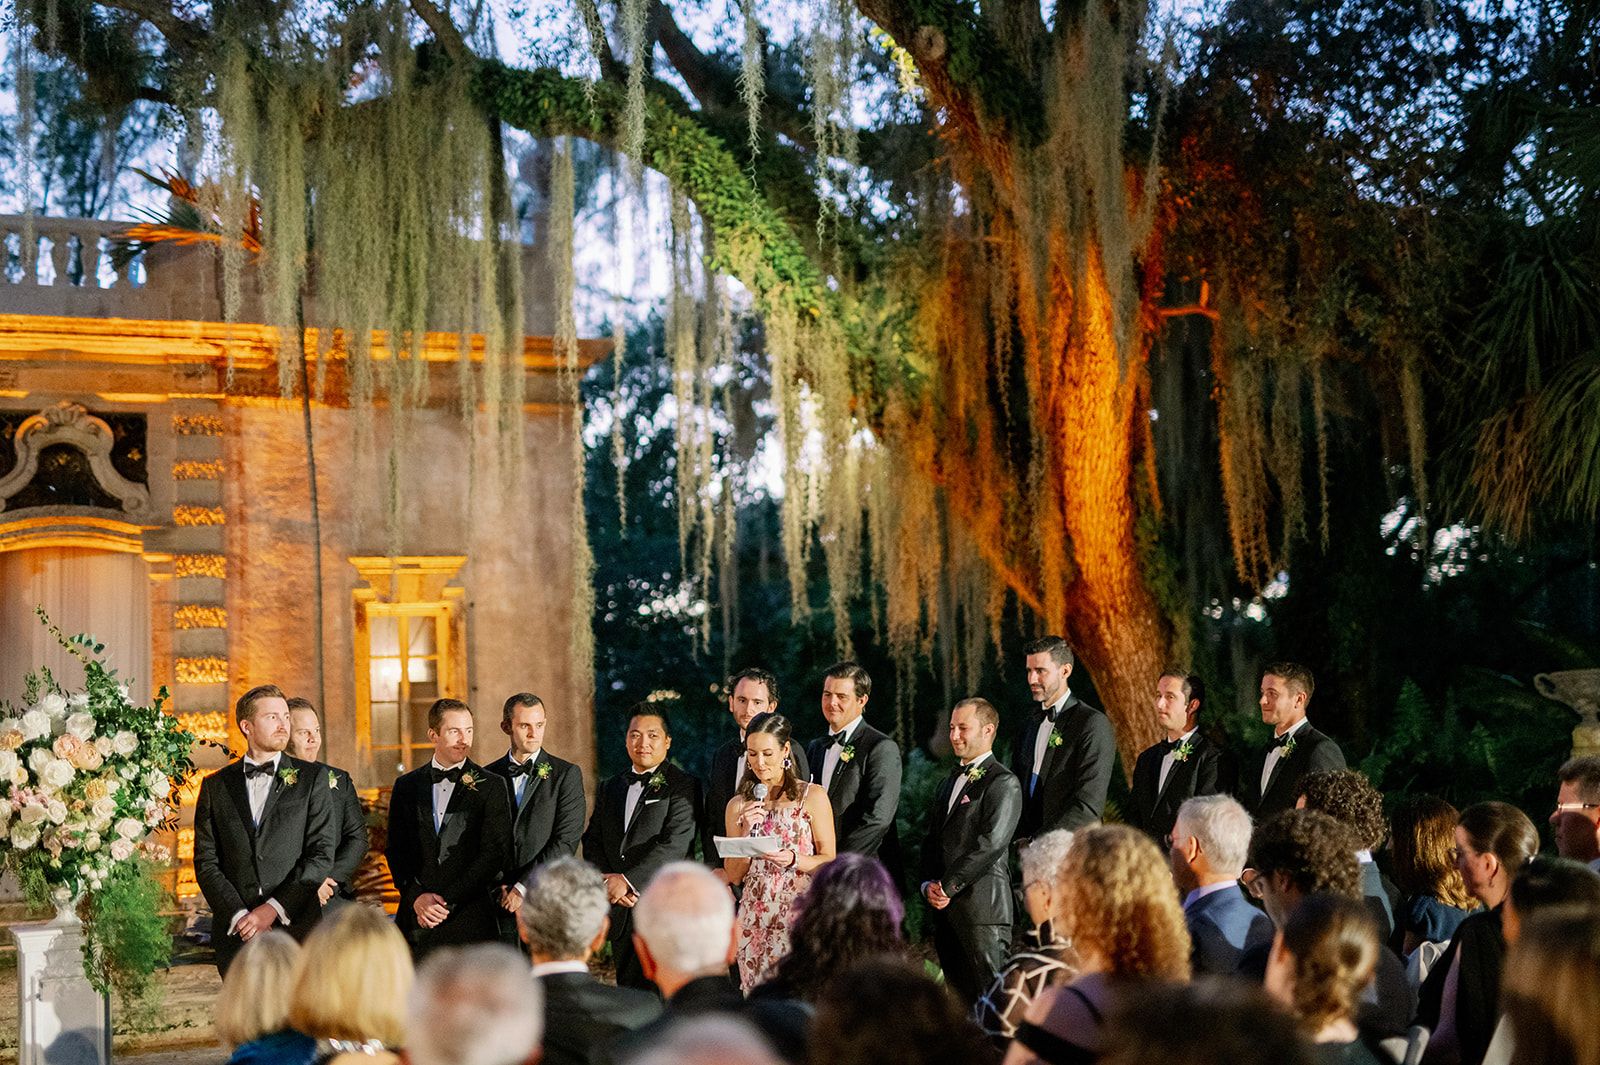 Nighttime wedding ceremony at Vizcaya Museum and Gardens.